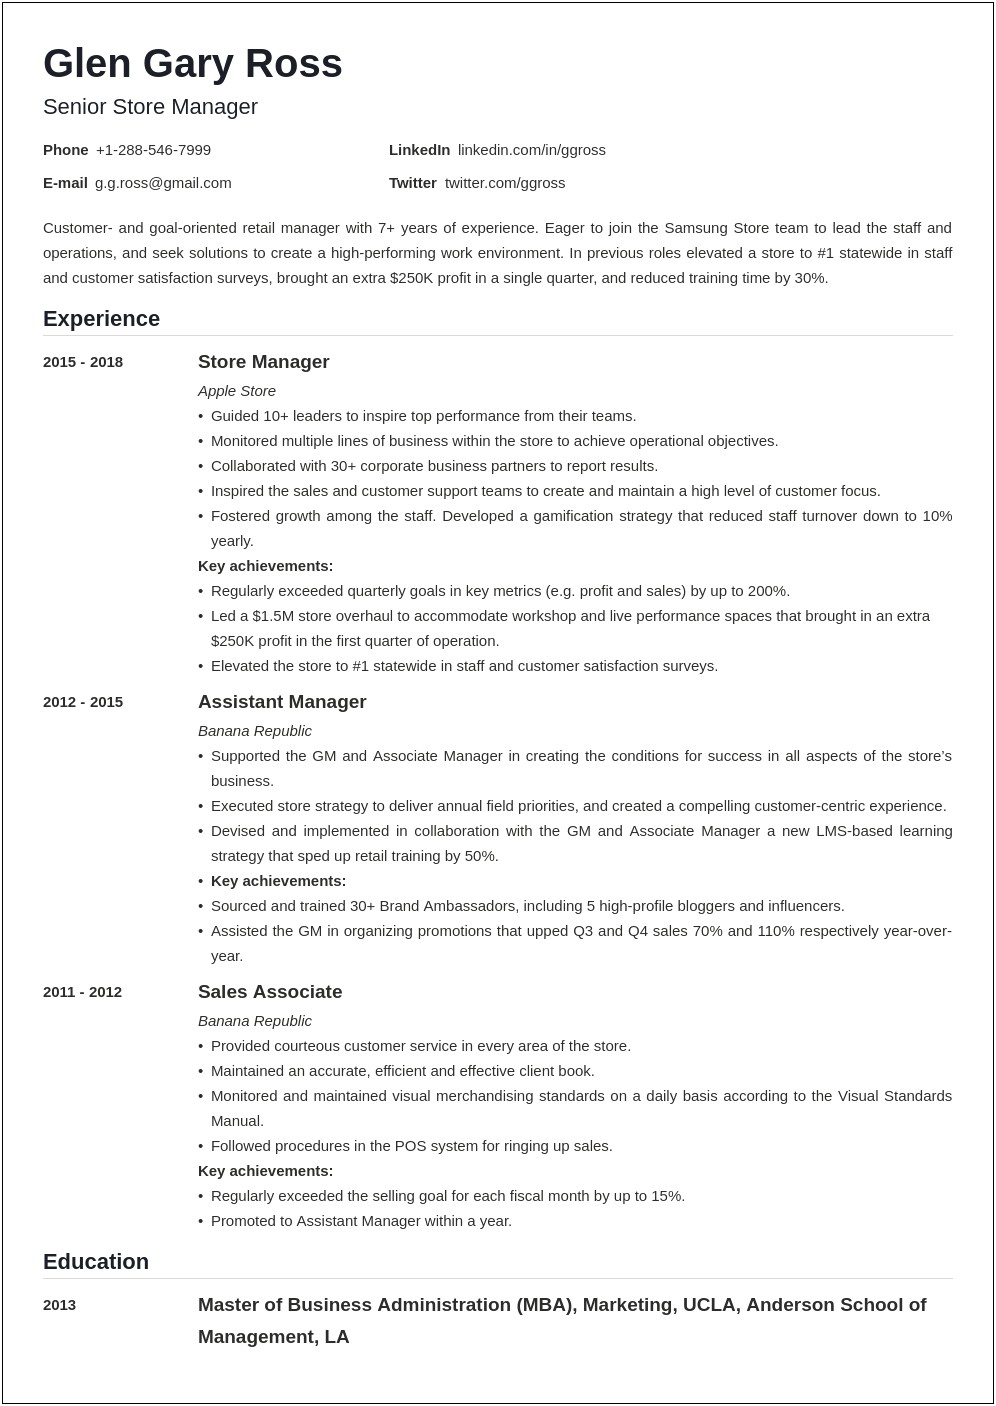 Professional Summary Resume Sample For Retail